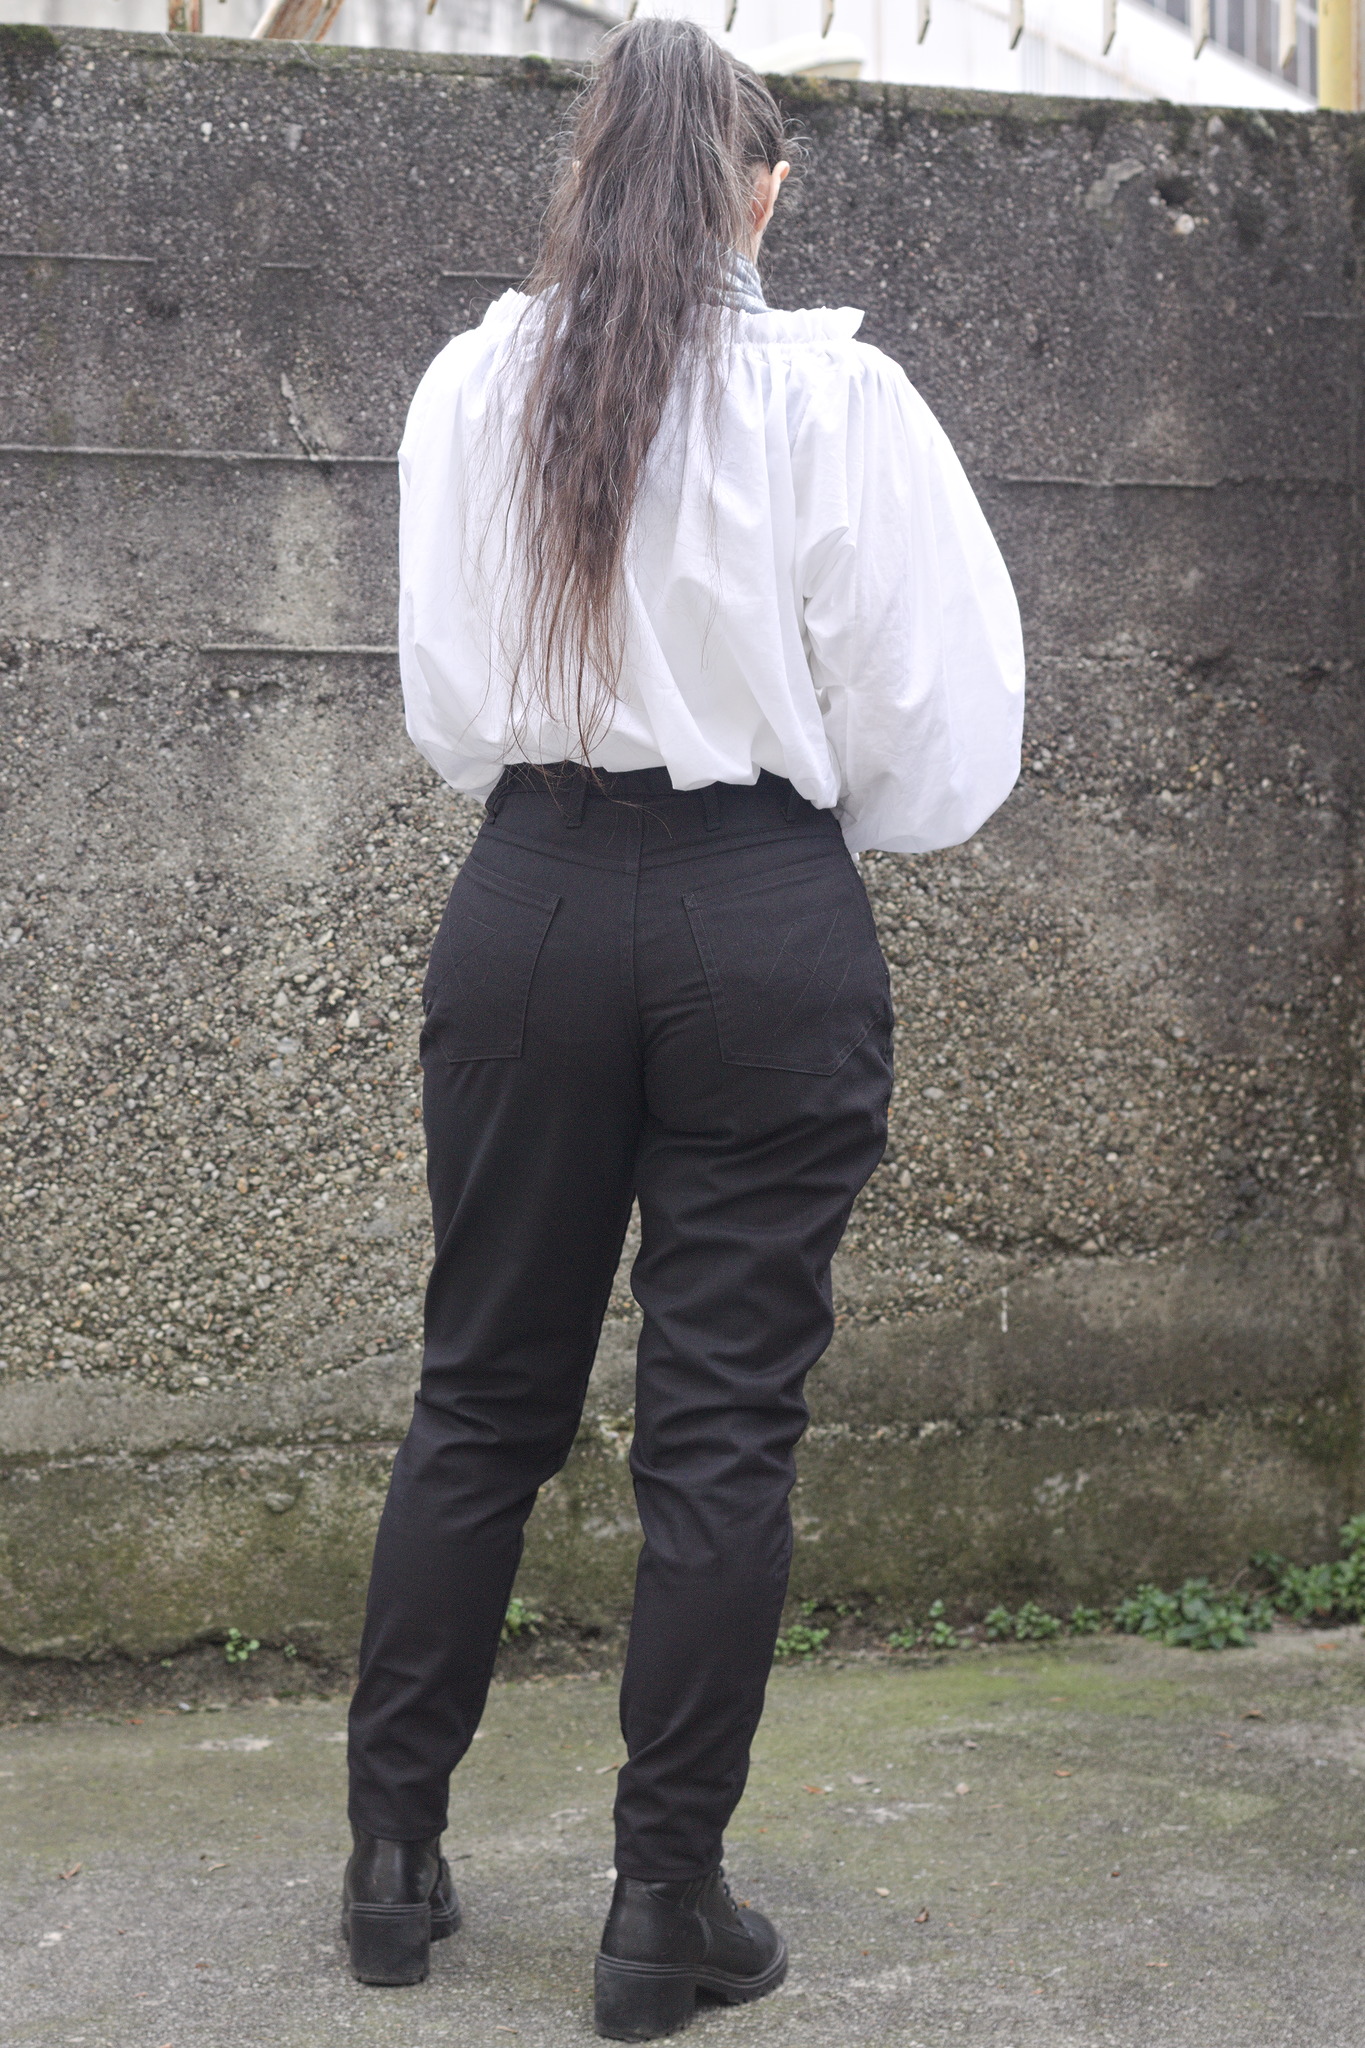 The same from the back, showing the applied pockets with a sewn logo.